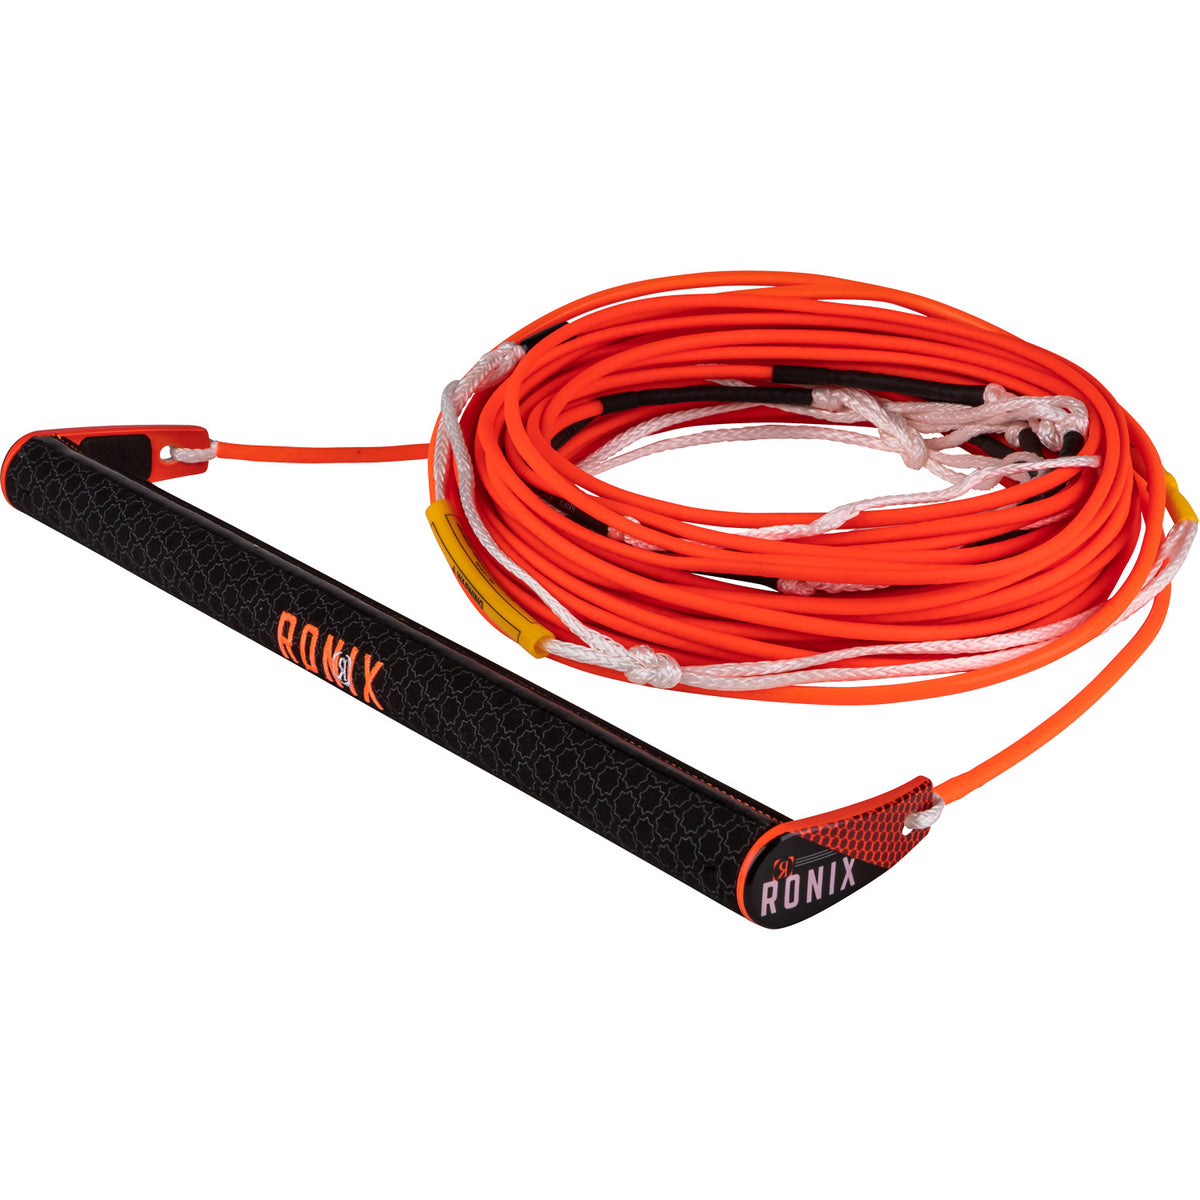 Combo 6.0 Wake Rope Package